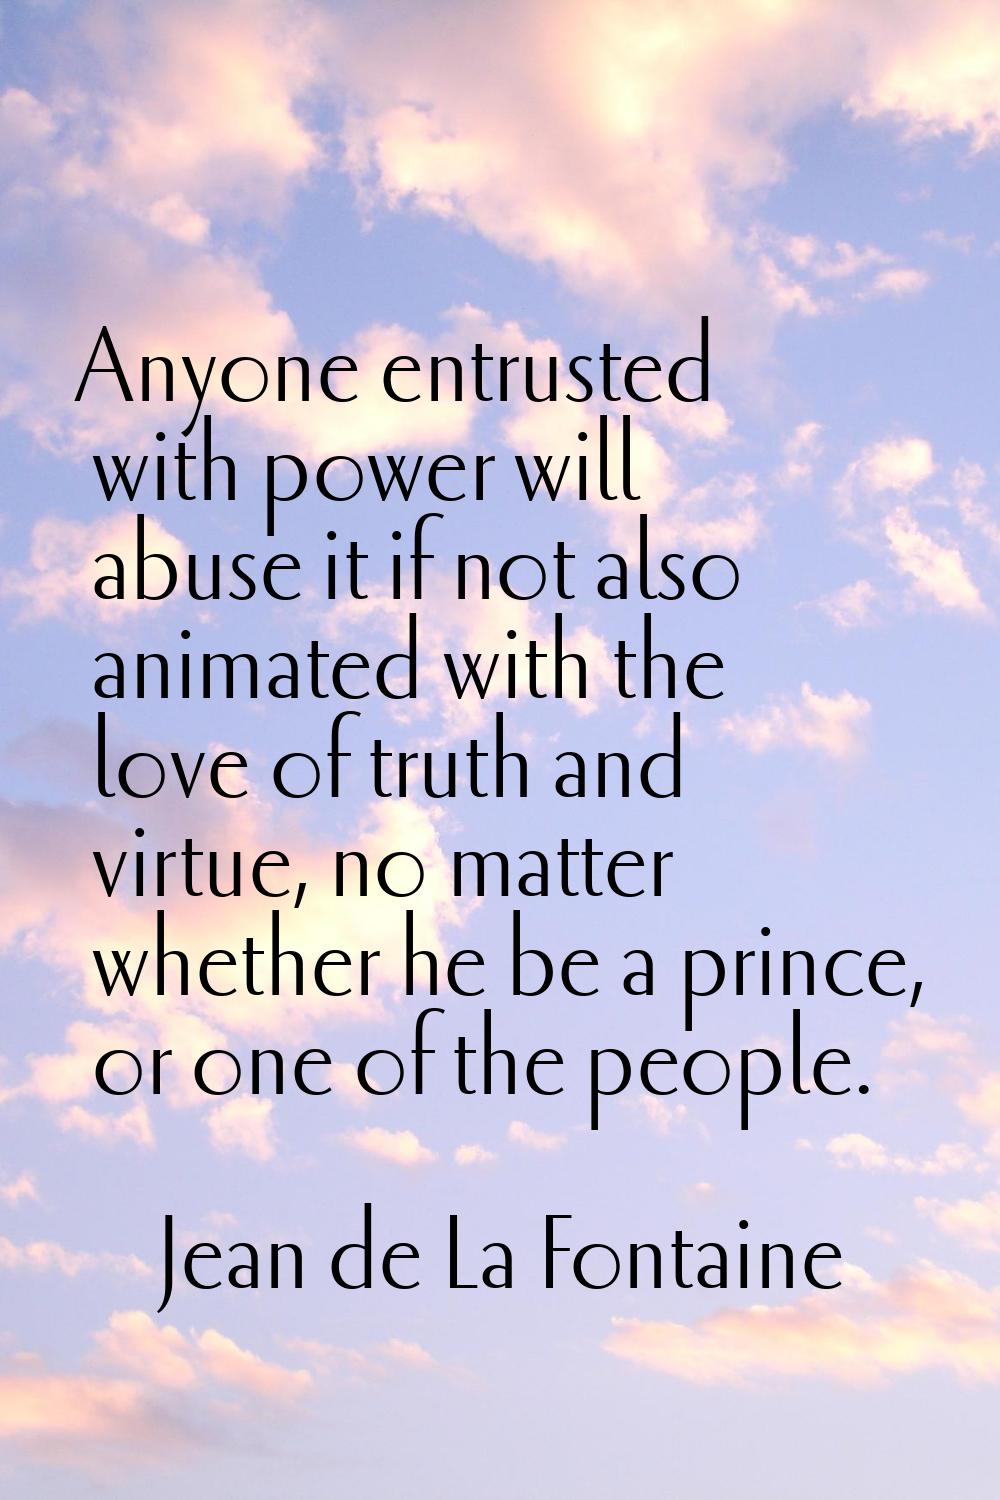 Anyone entrusted with power will abuse it if not also animated with the love of truth and virtue, n